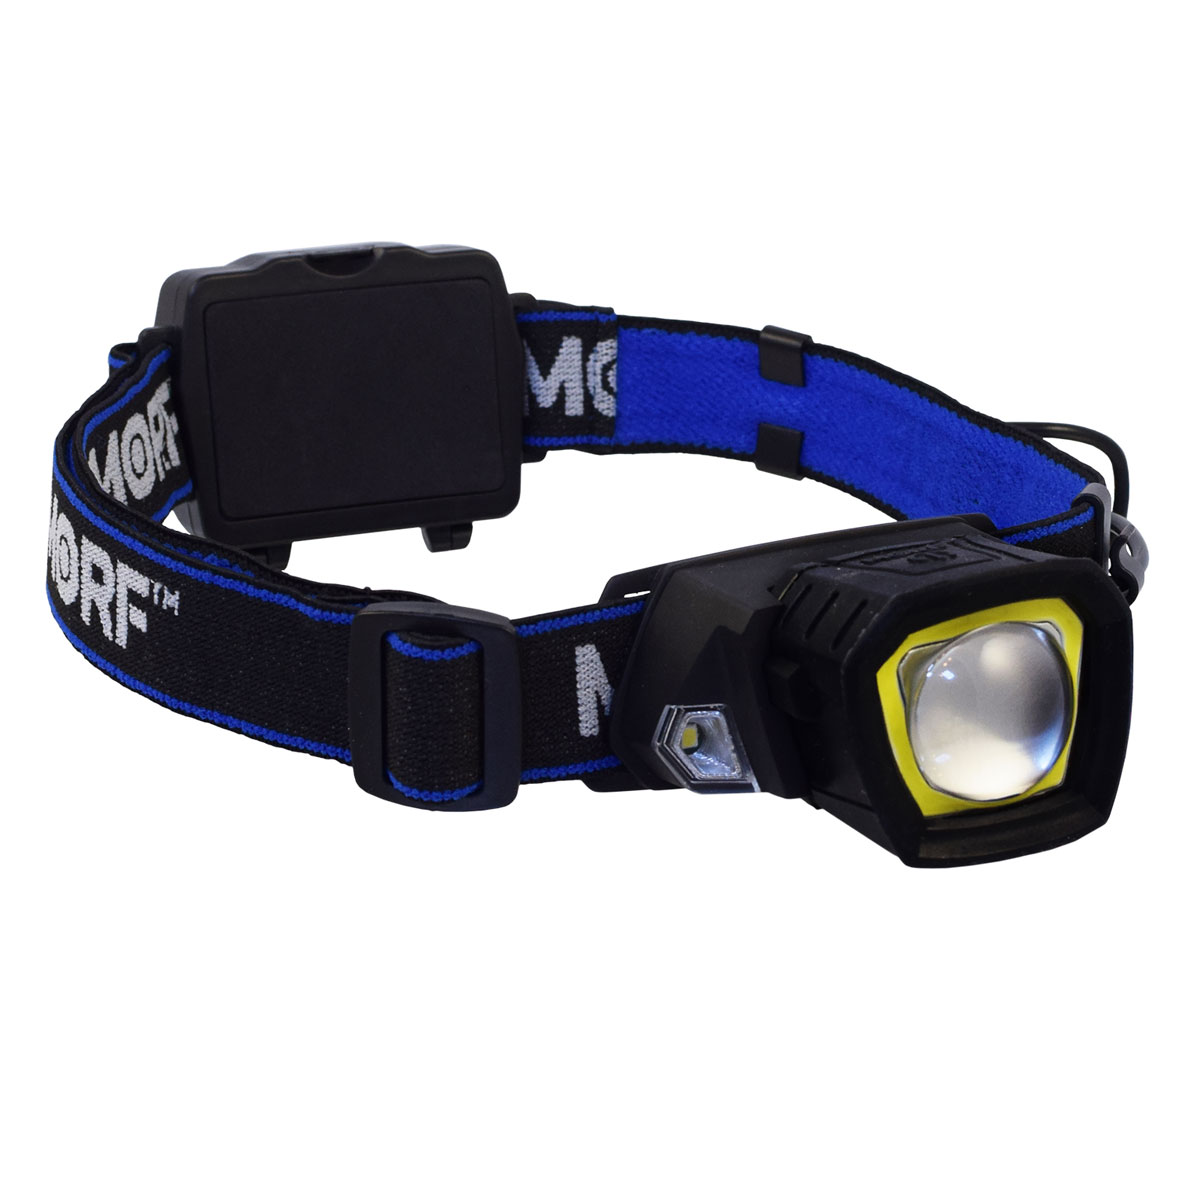 POLICE SECURITY MORF 3-IN-1 RUGGED 230 LUMEN HEADLAMP + MAGNETIC FLASHLIGHT Photo